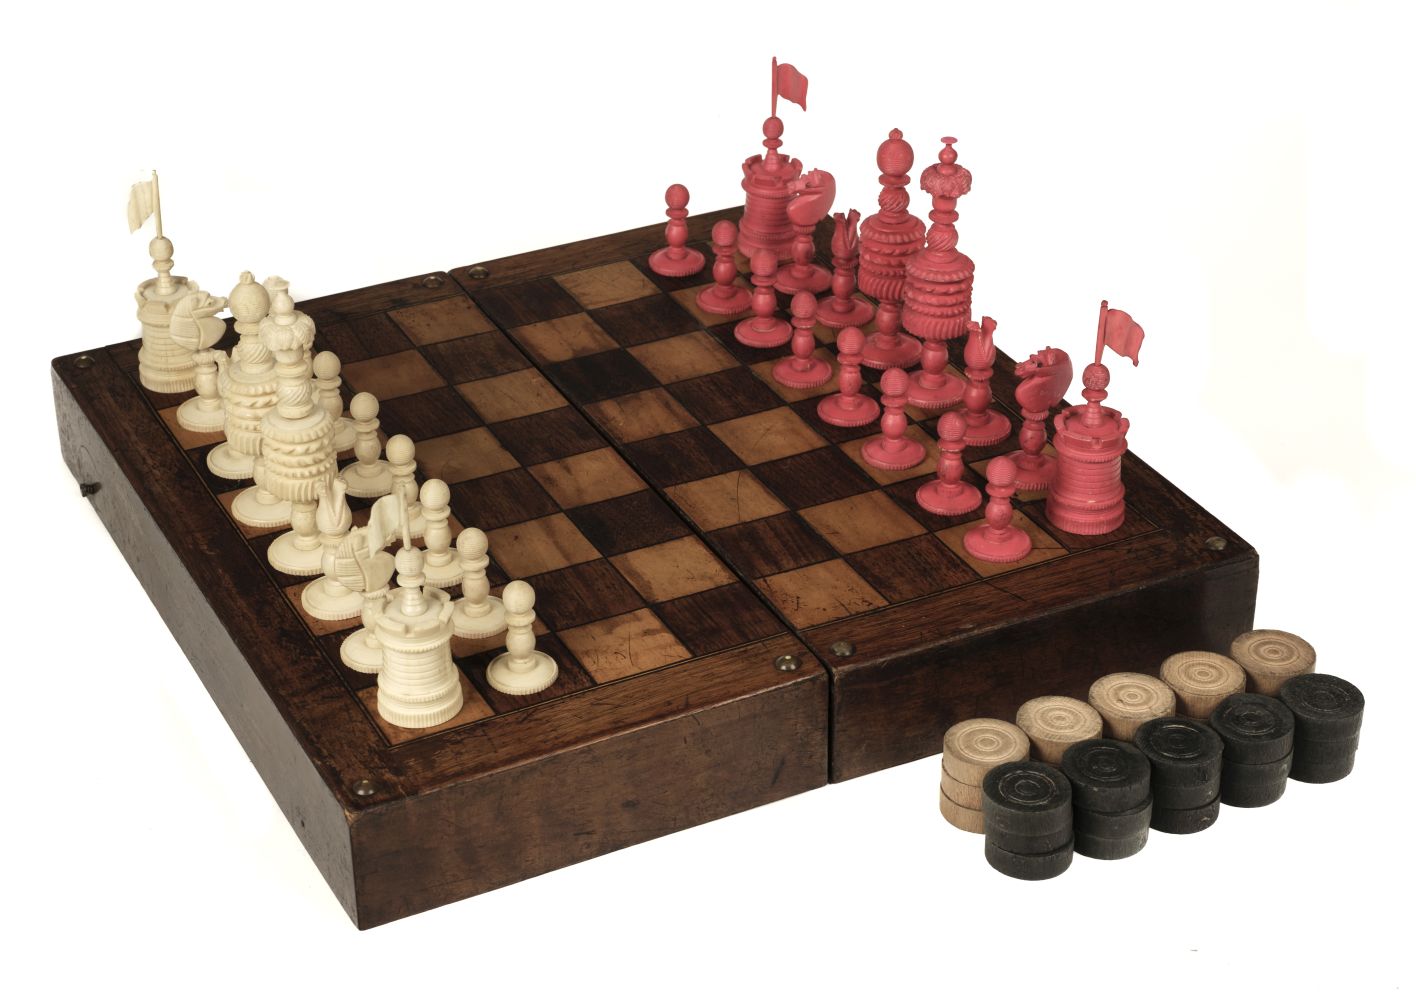 * Chess. A 19th-century English bone chess set carved in the "Barleycorn" pattern